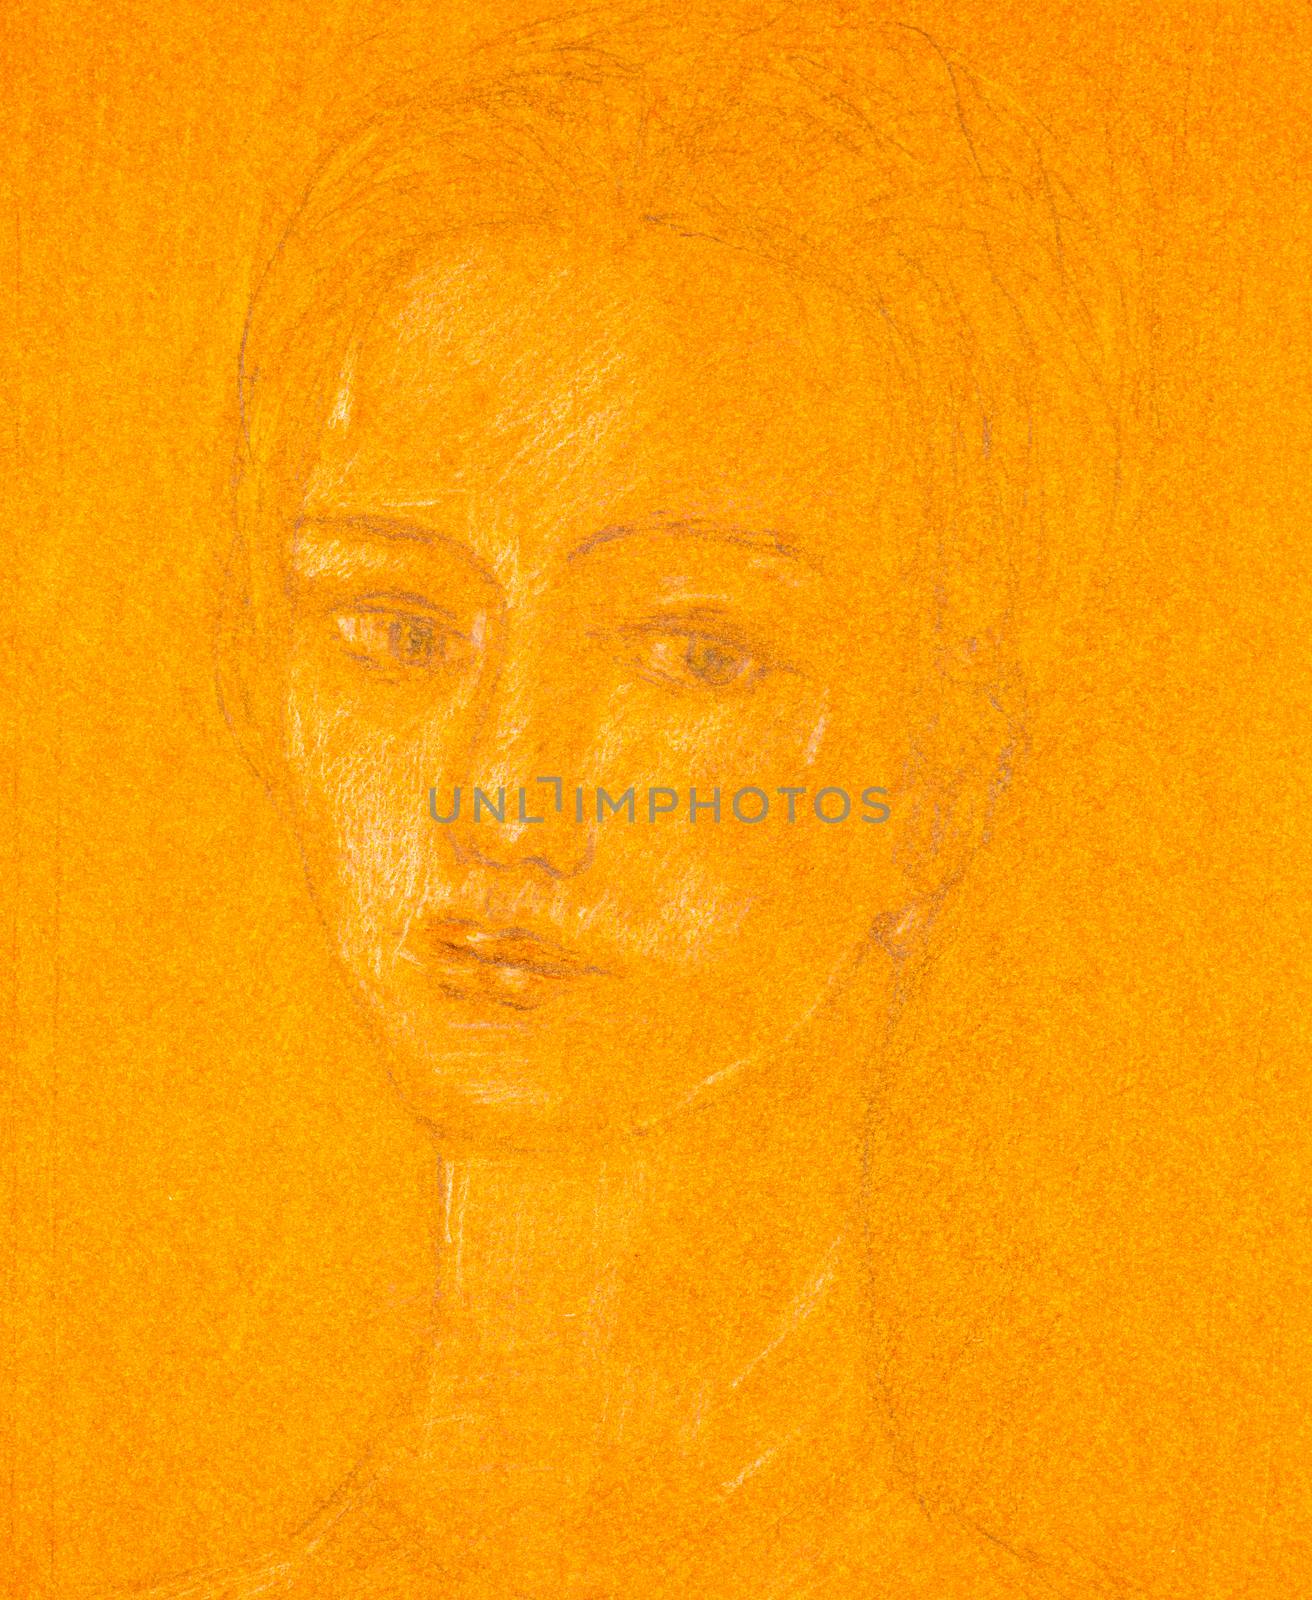 Pencil sketch on orange colored paper of a young woman’s portrait.